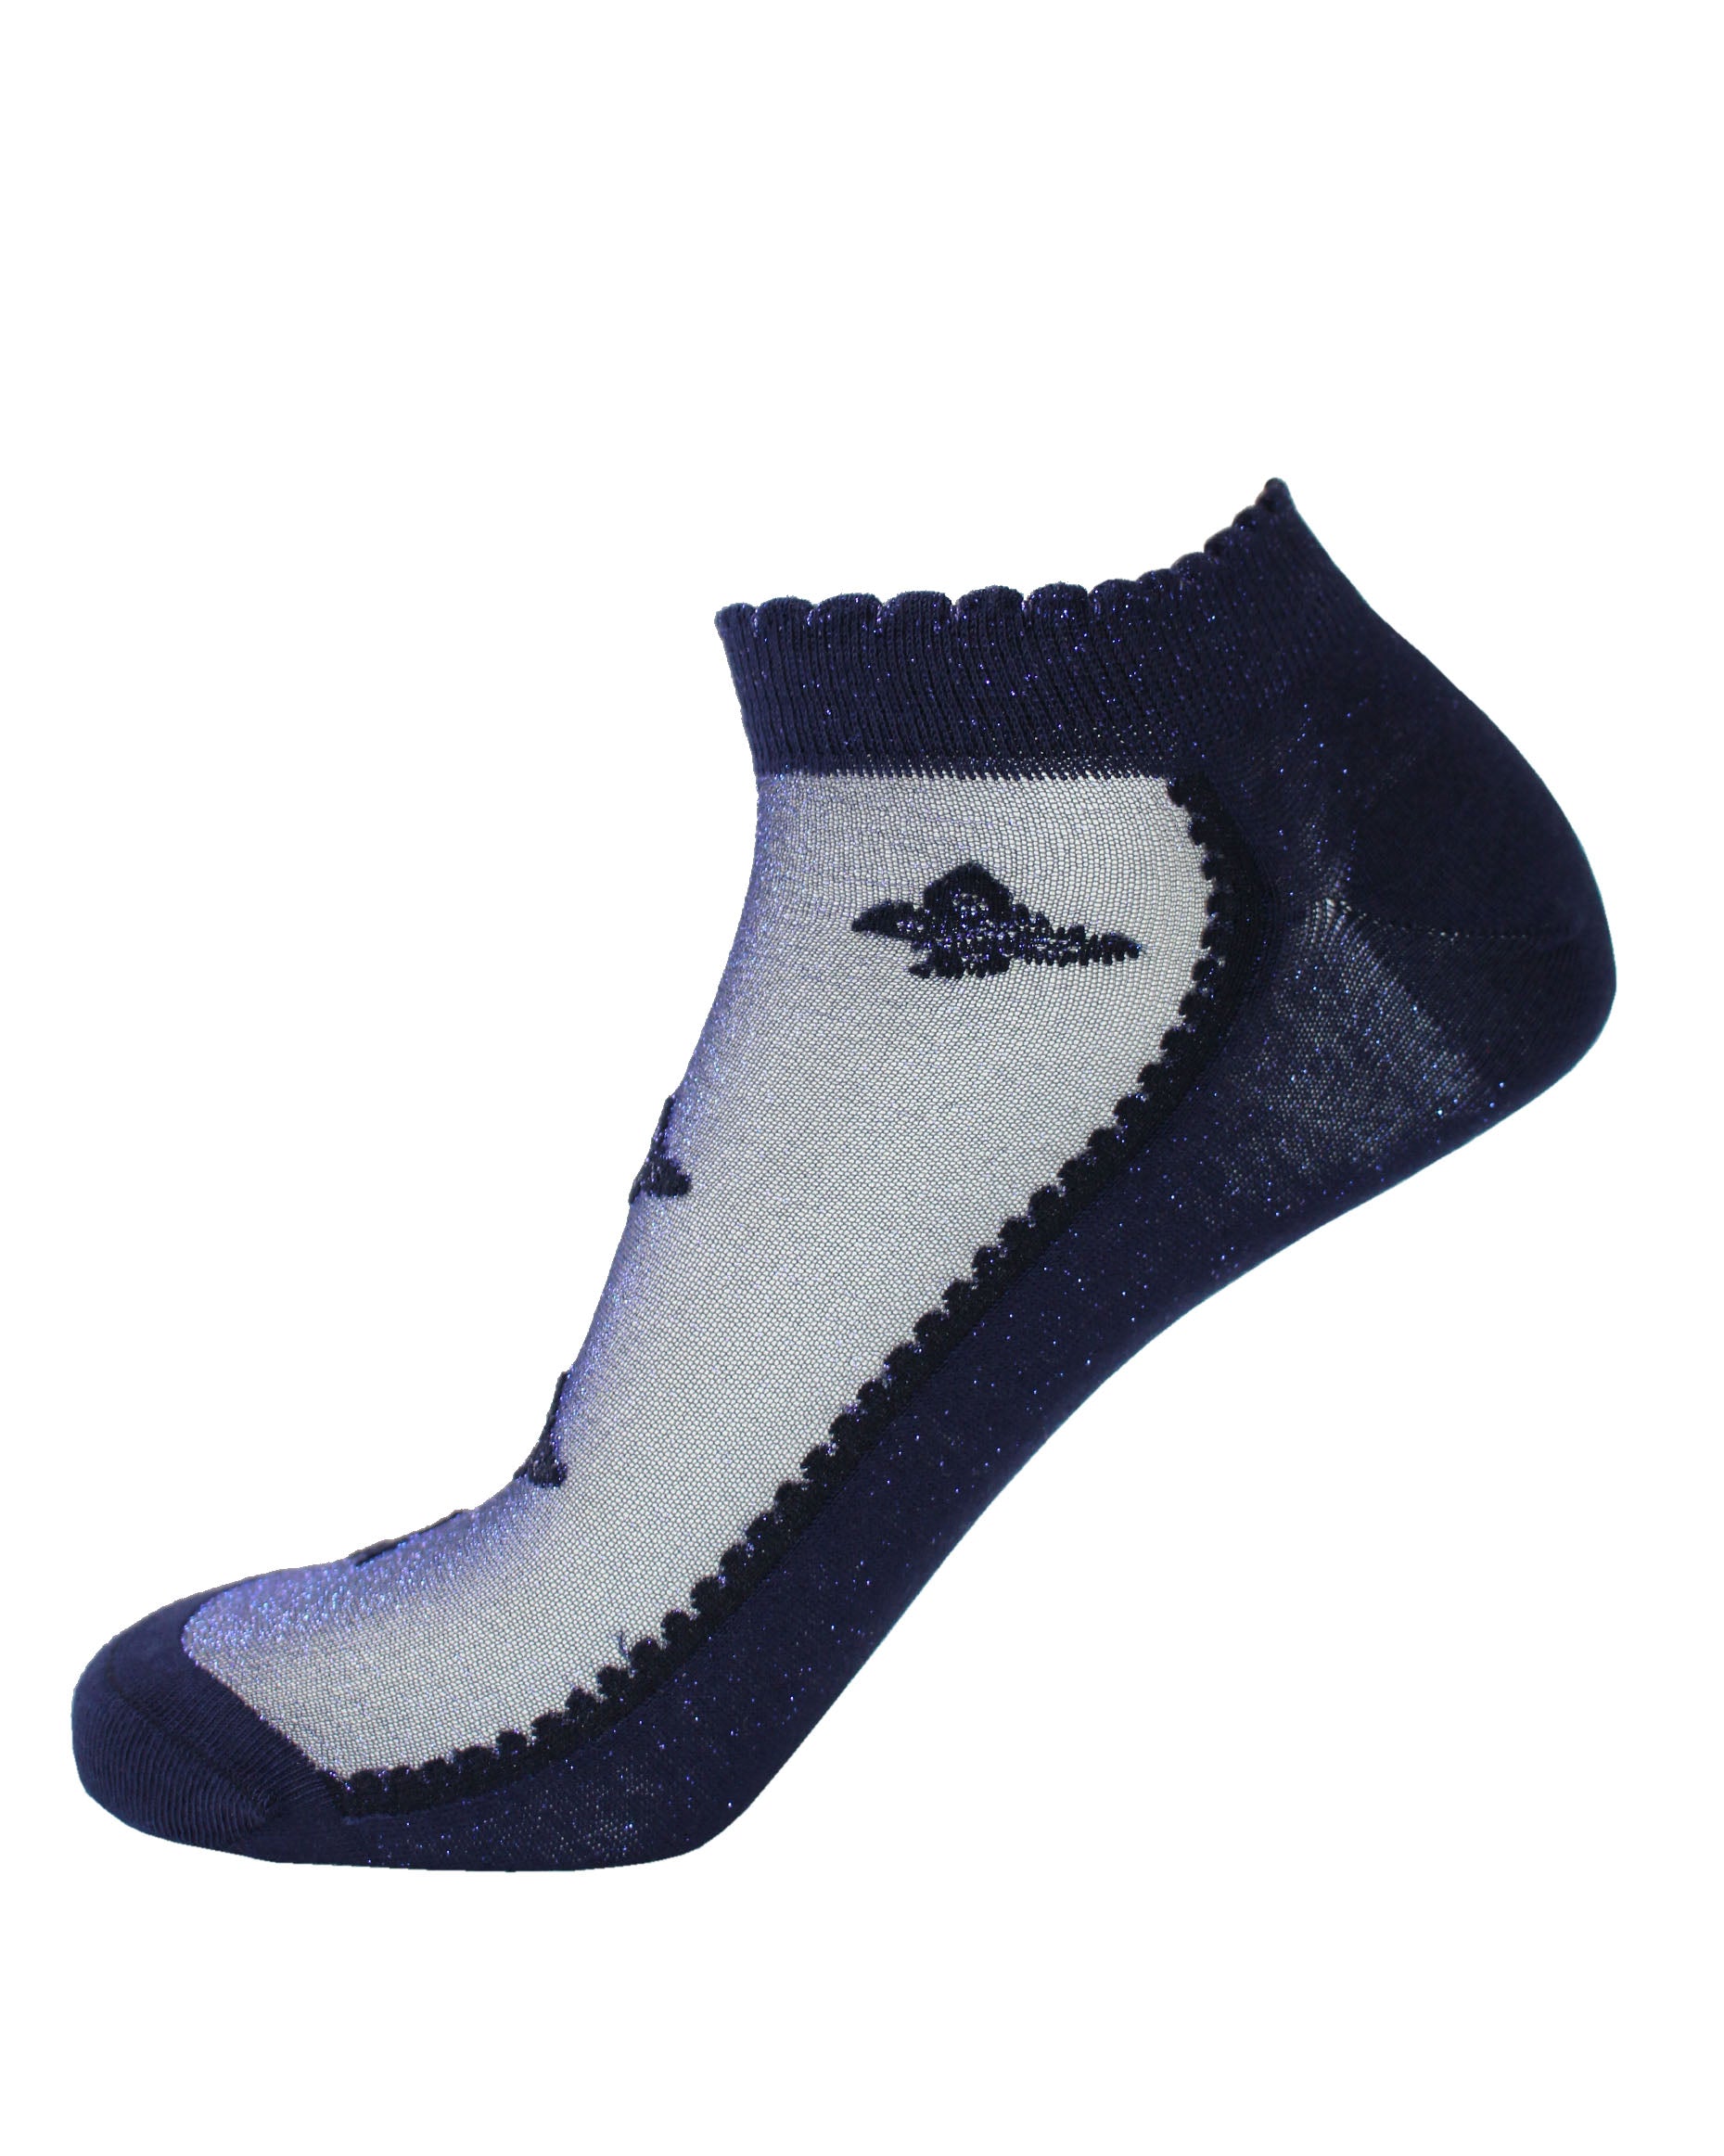 SiSi Butterfly Calzino - Soft low ankle navy sparkly cotton socks with a sheer front, butterfly motif pattern, shaped heal, flat toe seam and scalloped edge cuff.